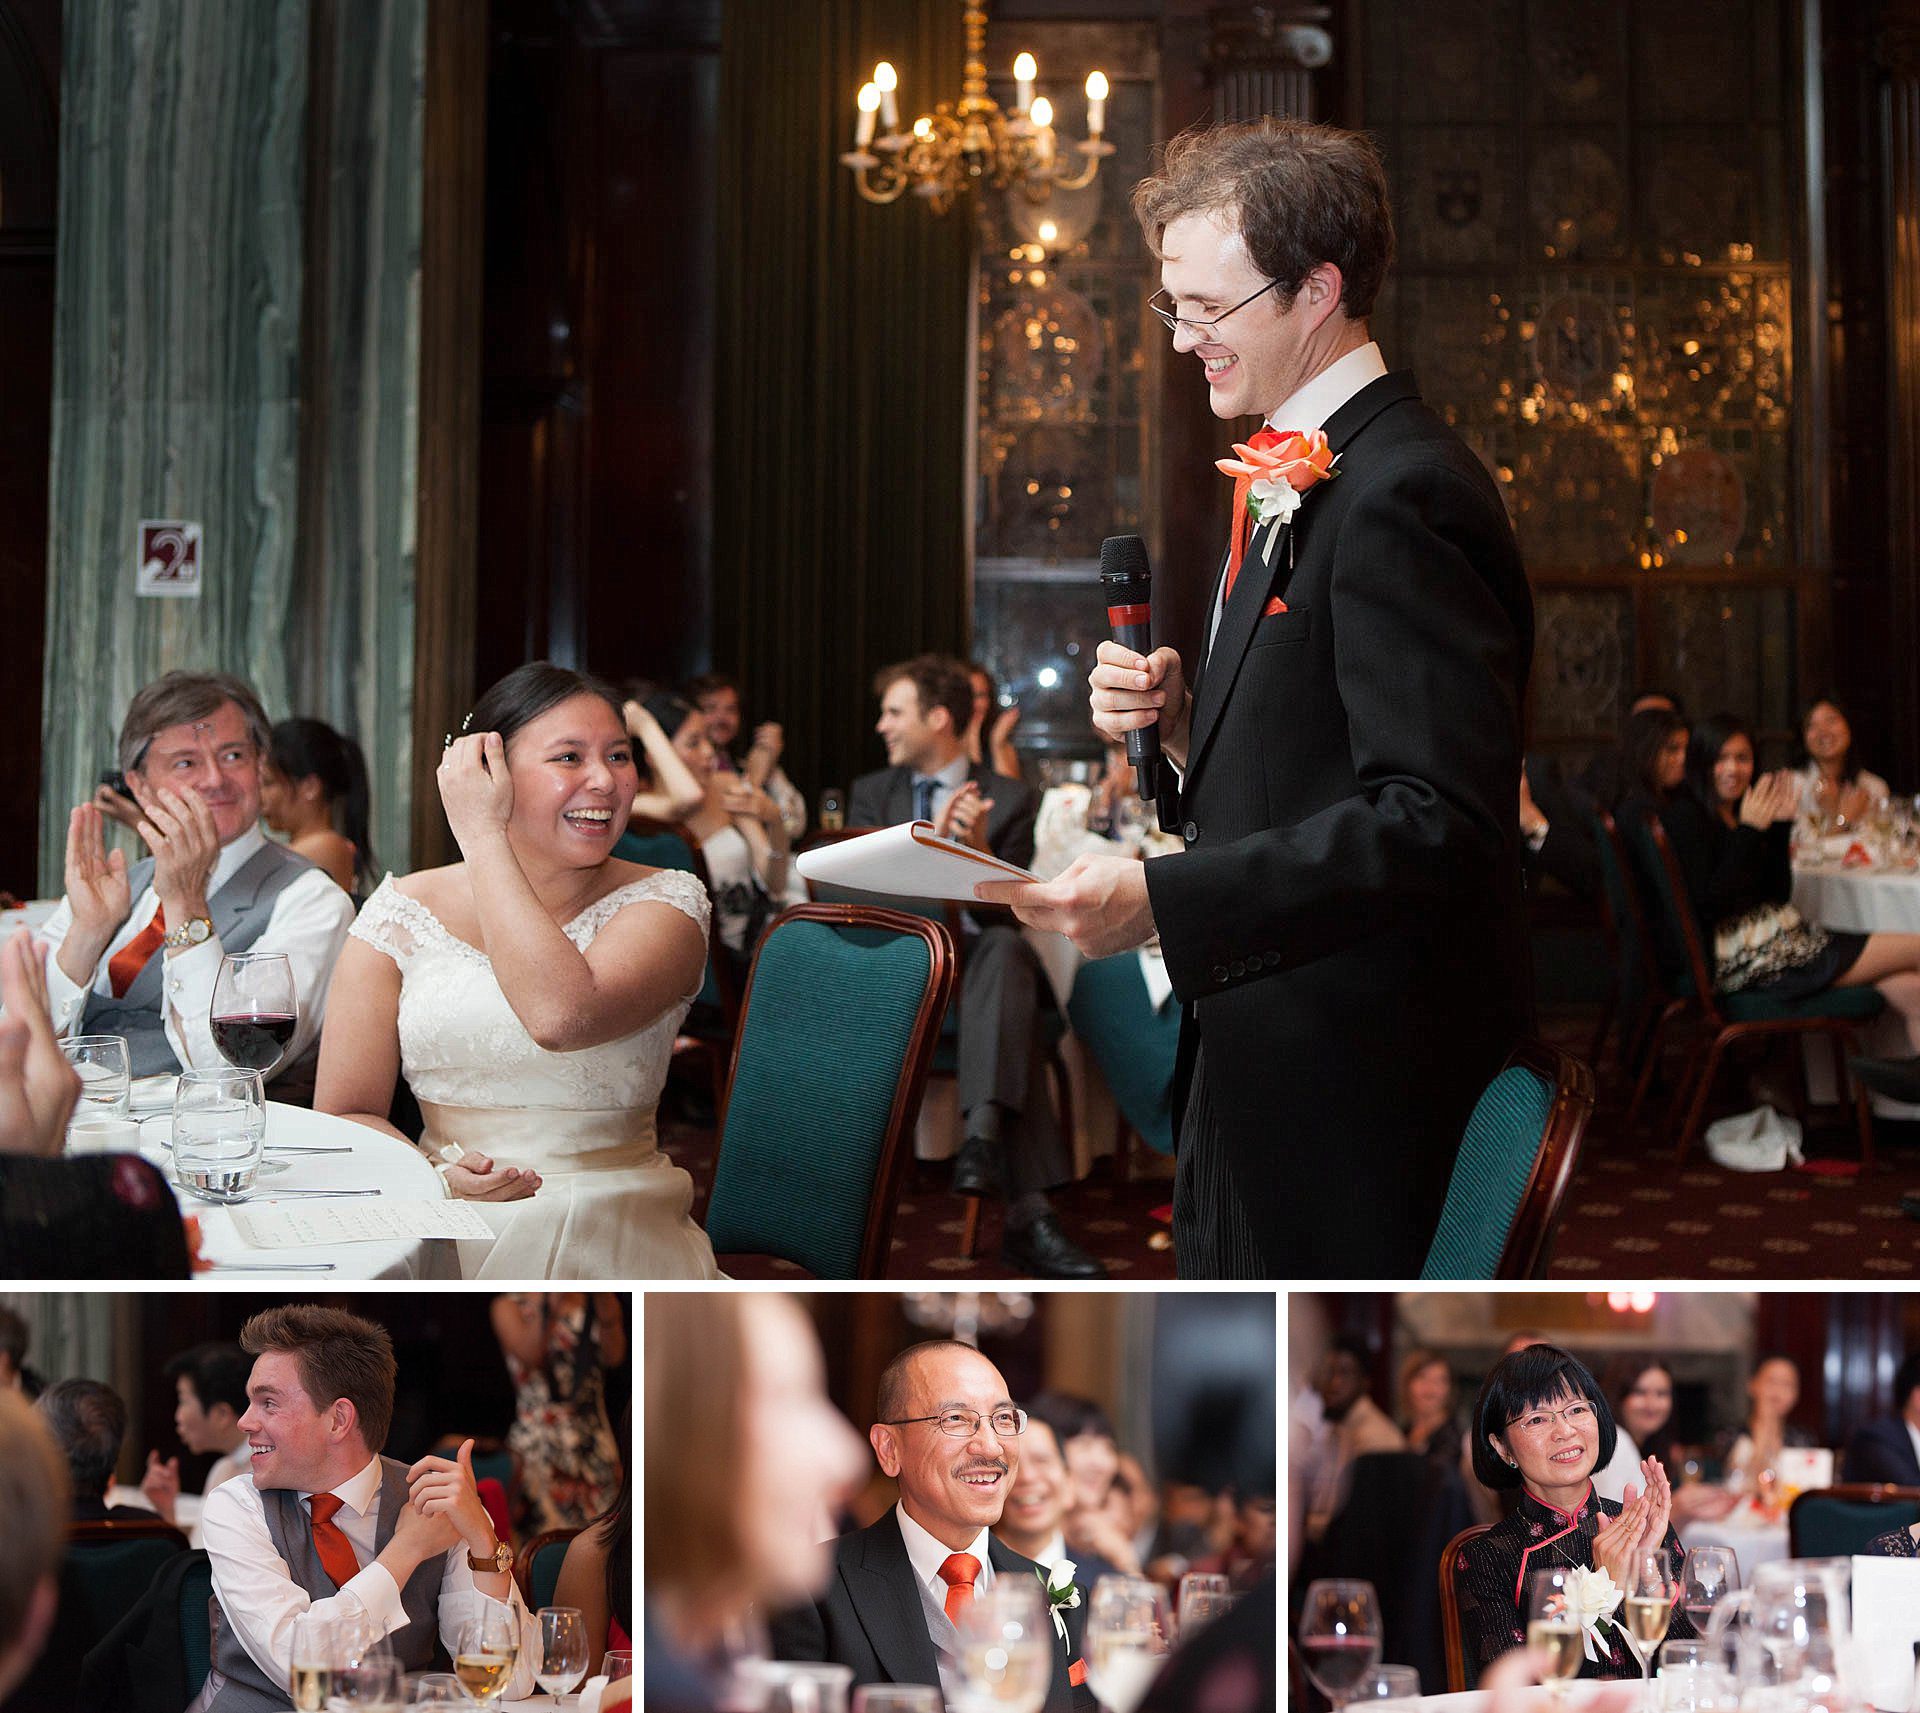 Wedding speeches at The Law Society